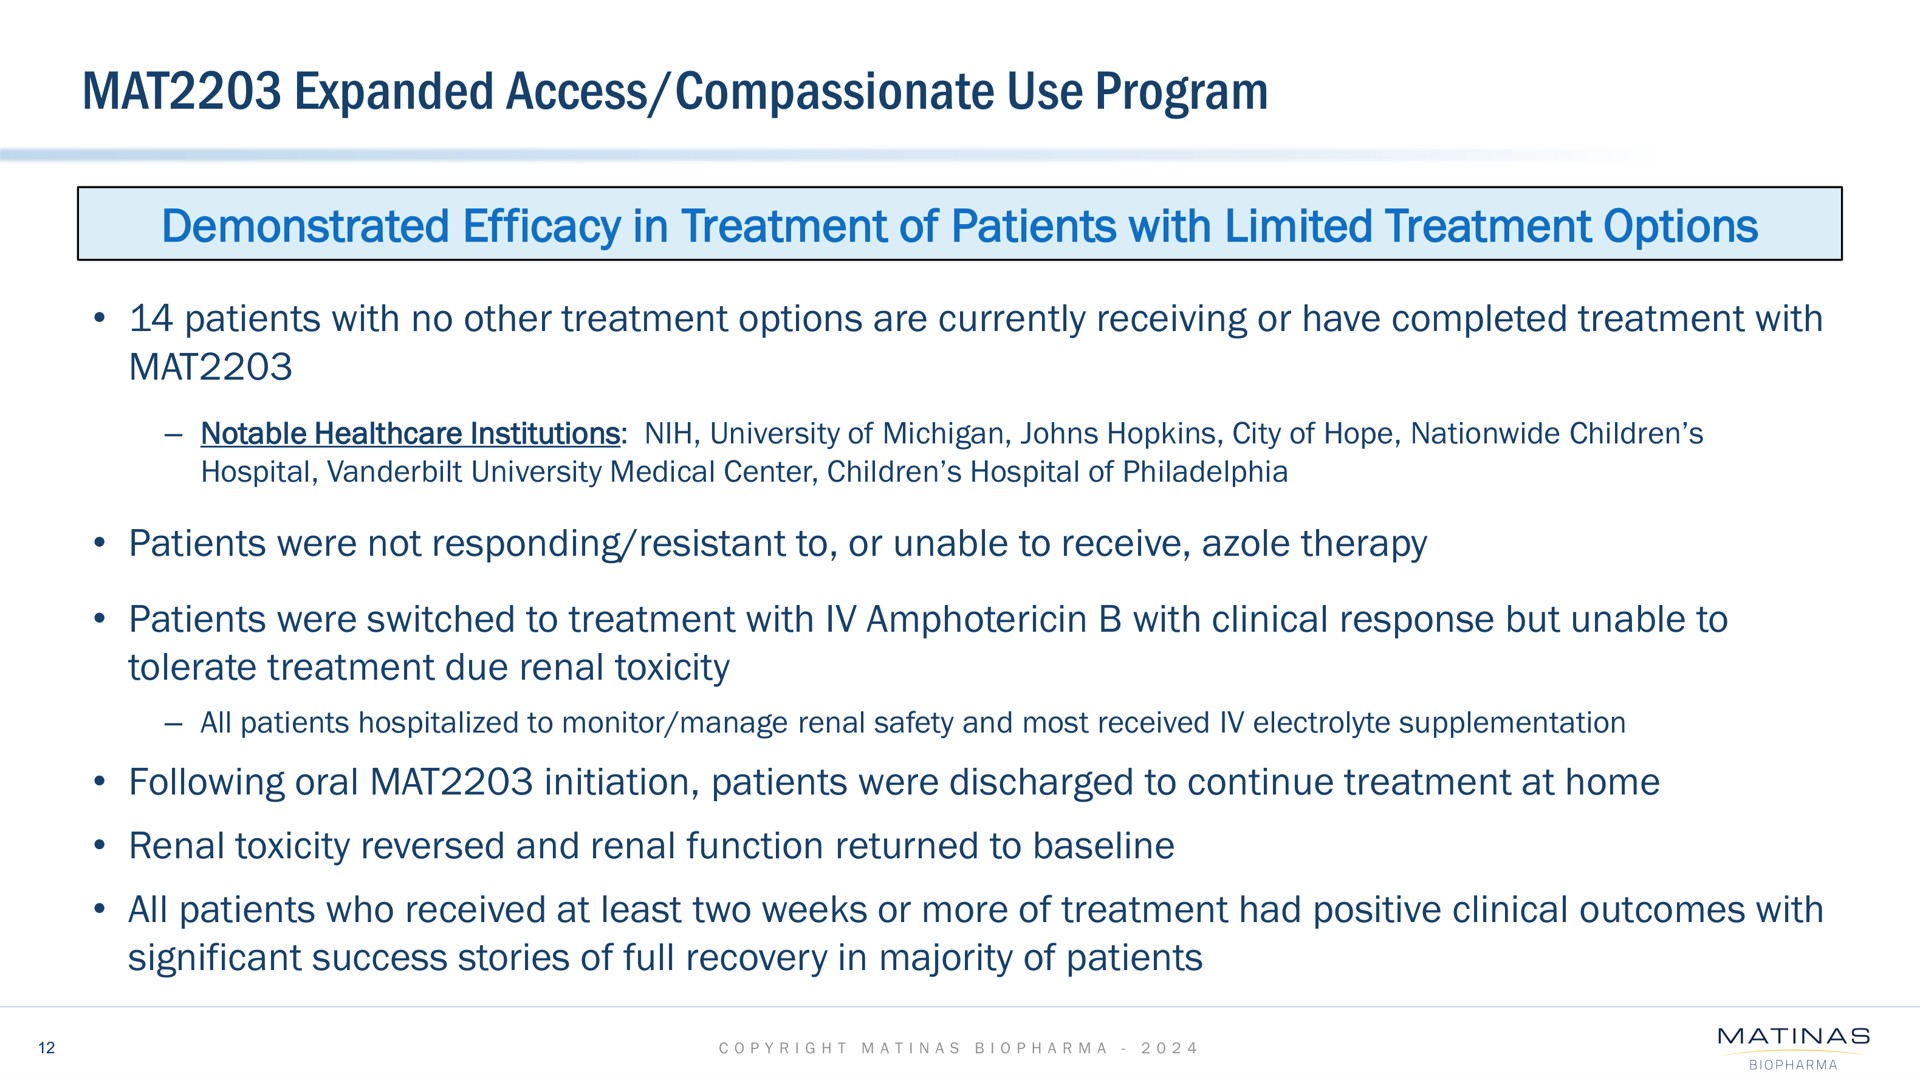 mat expanded access compassionate use program demonstrated efficacy in treatment of patients with limited treatment options | Matinas BioPharma